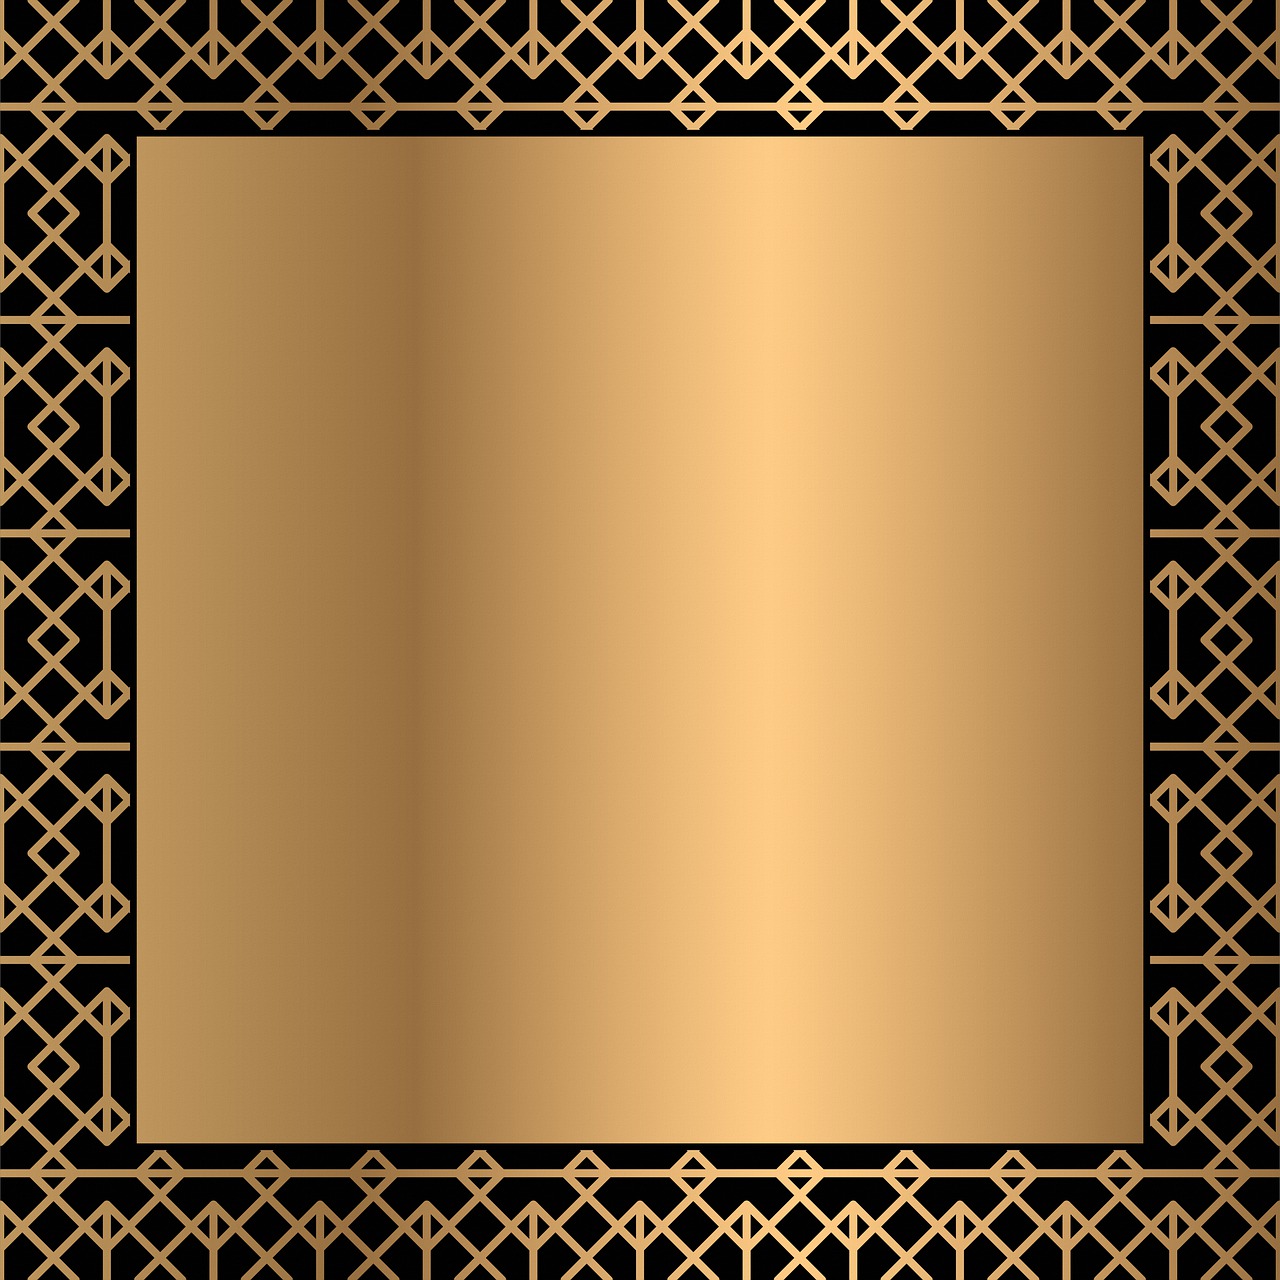 a gold metal plate on a black background, art deco, stylized border, lattice, serene, light brown background